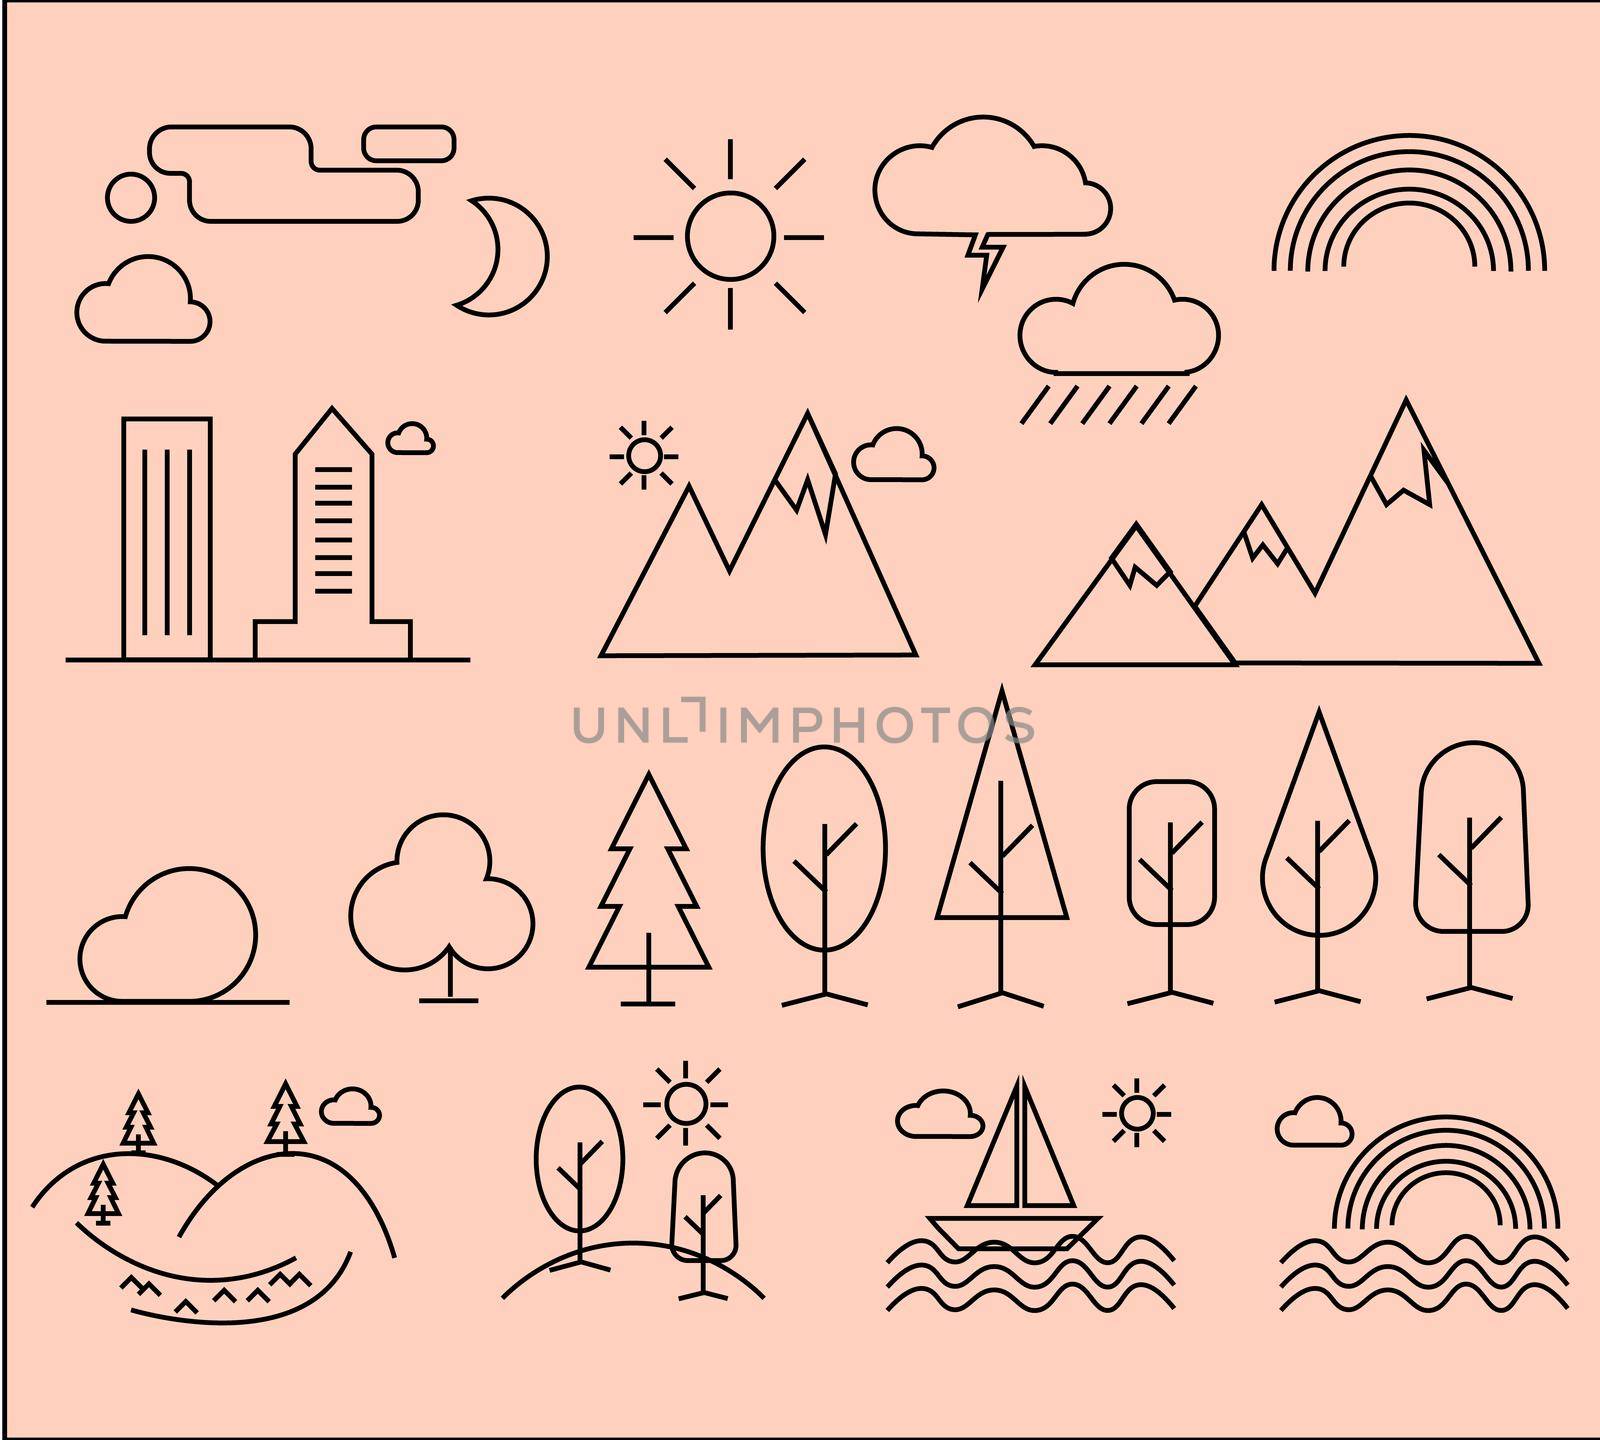 Set of linear icons of city landscape elements. Thin icons for web, mobile, print design. Illustration